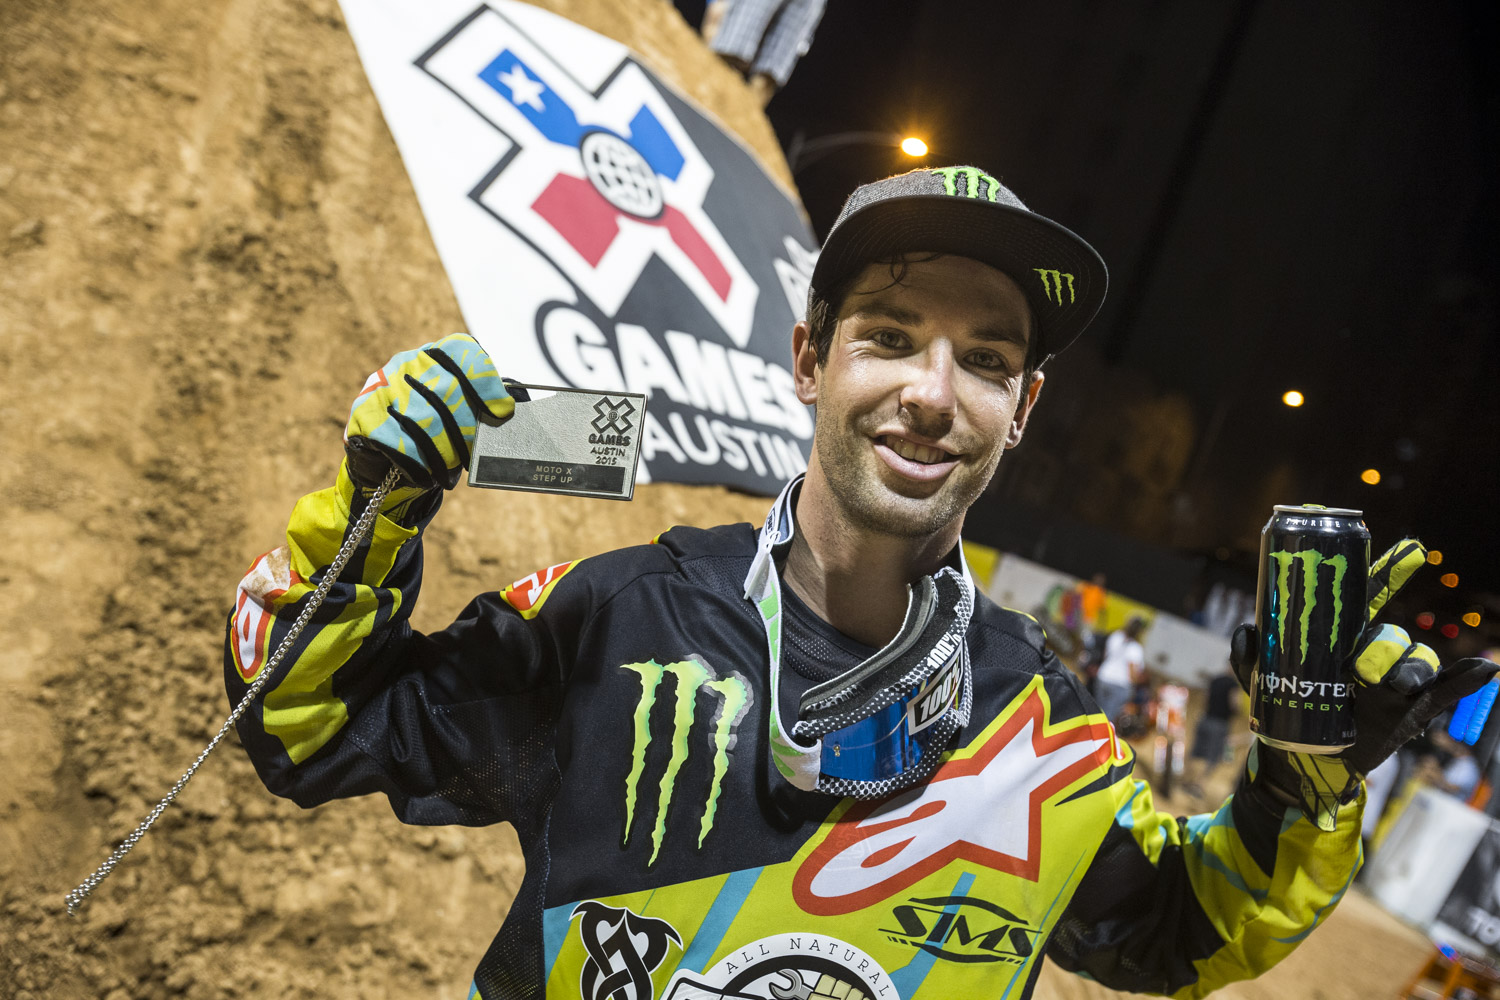 Monster Energy's Bryce Hudson Wins Silver Medal in Moto X Step Up at X Games Austin 2015